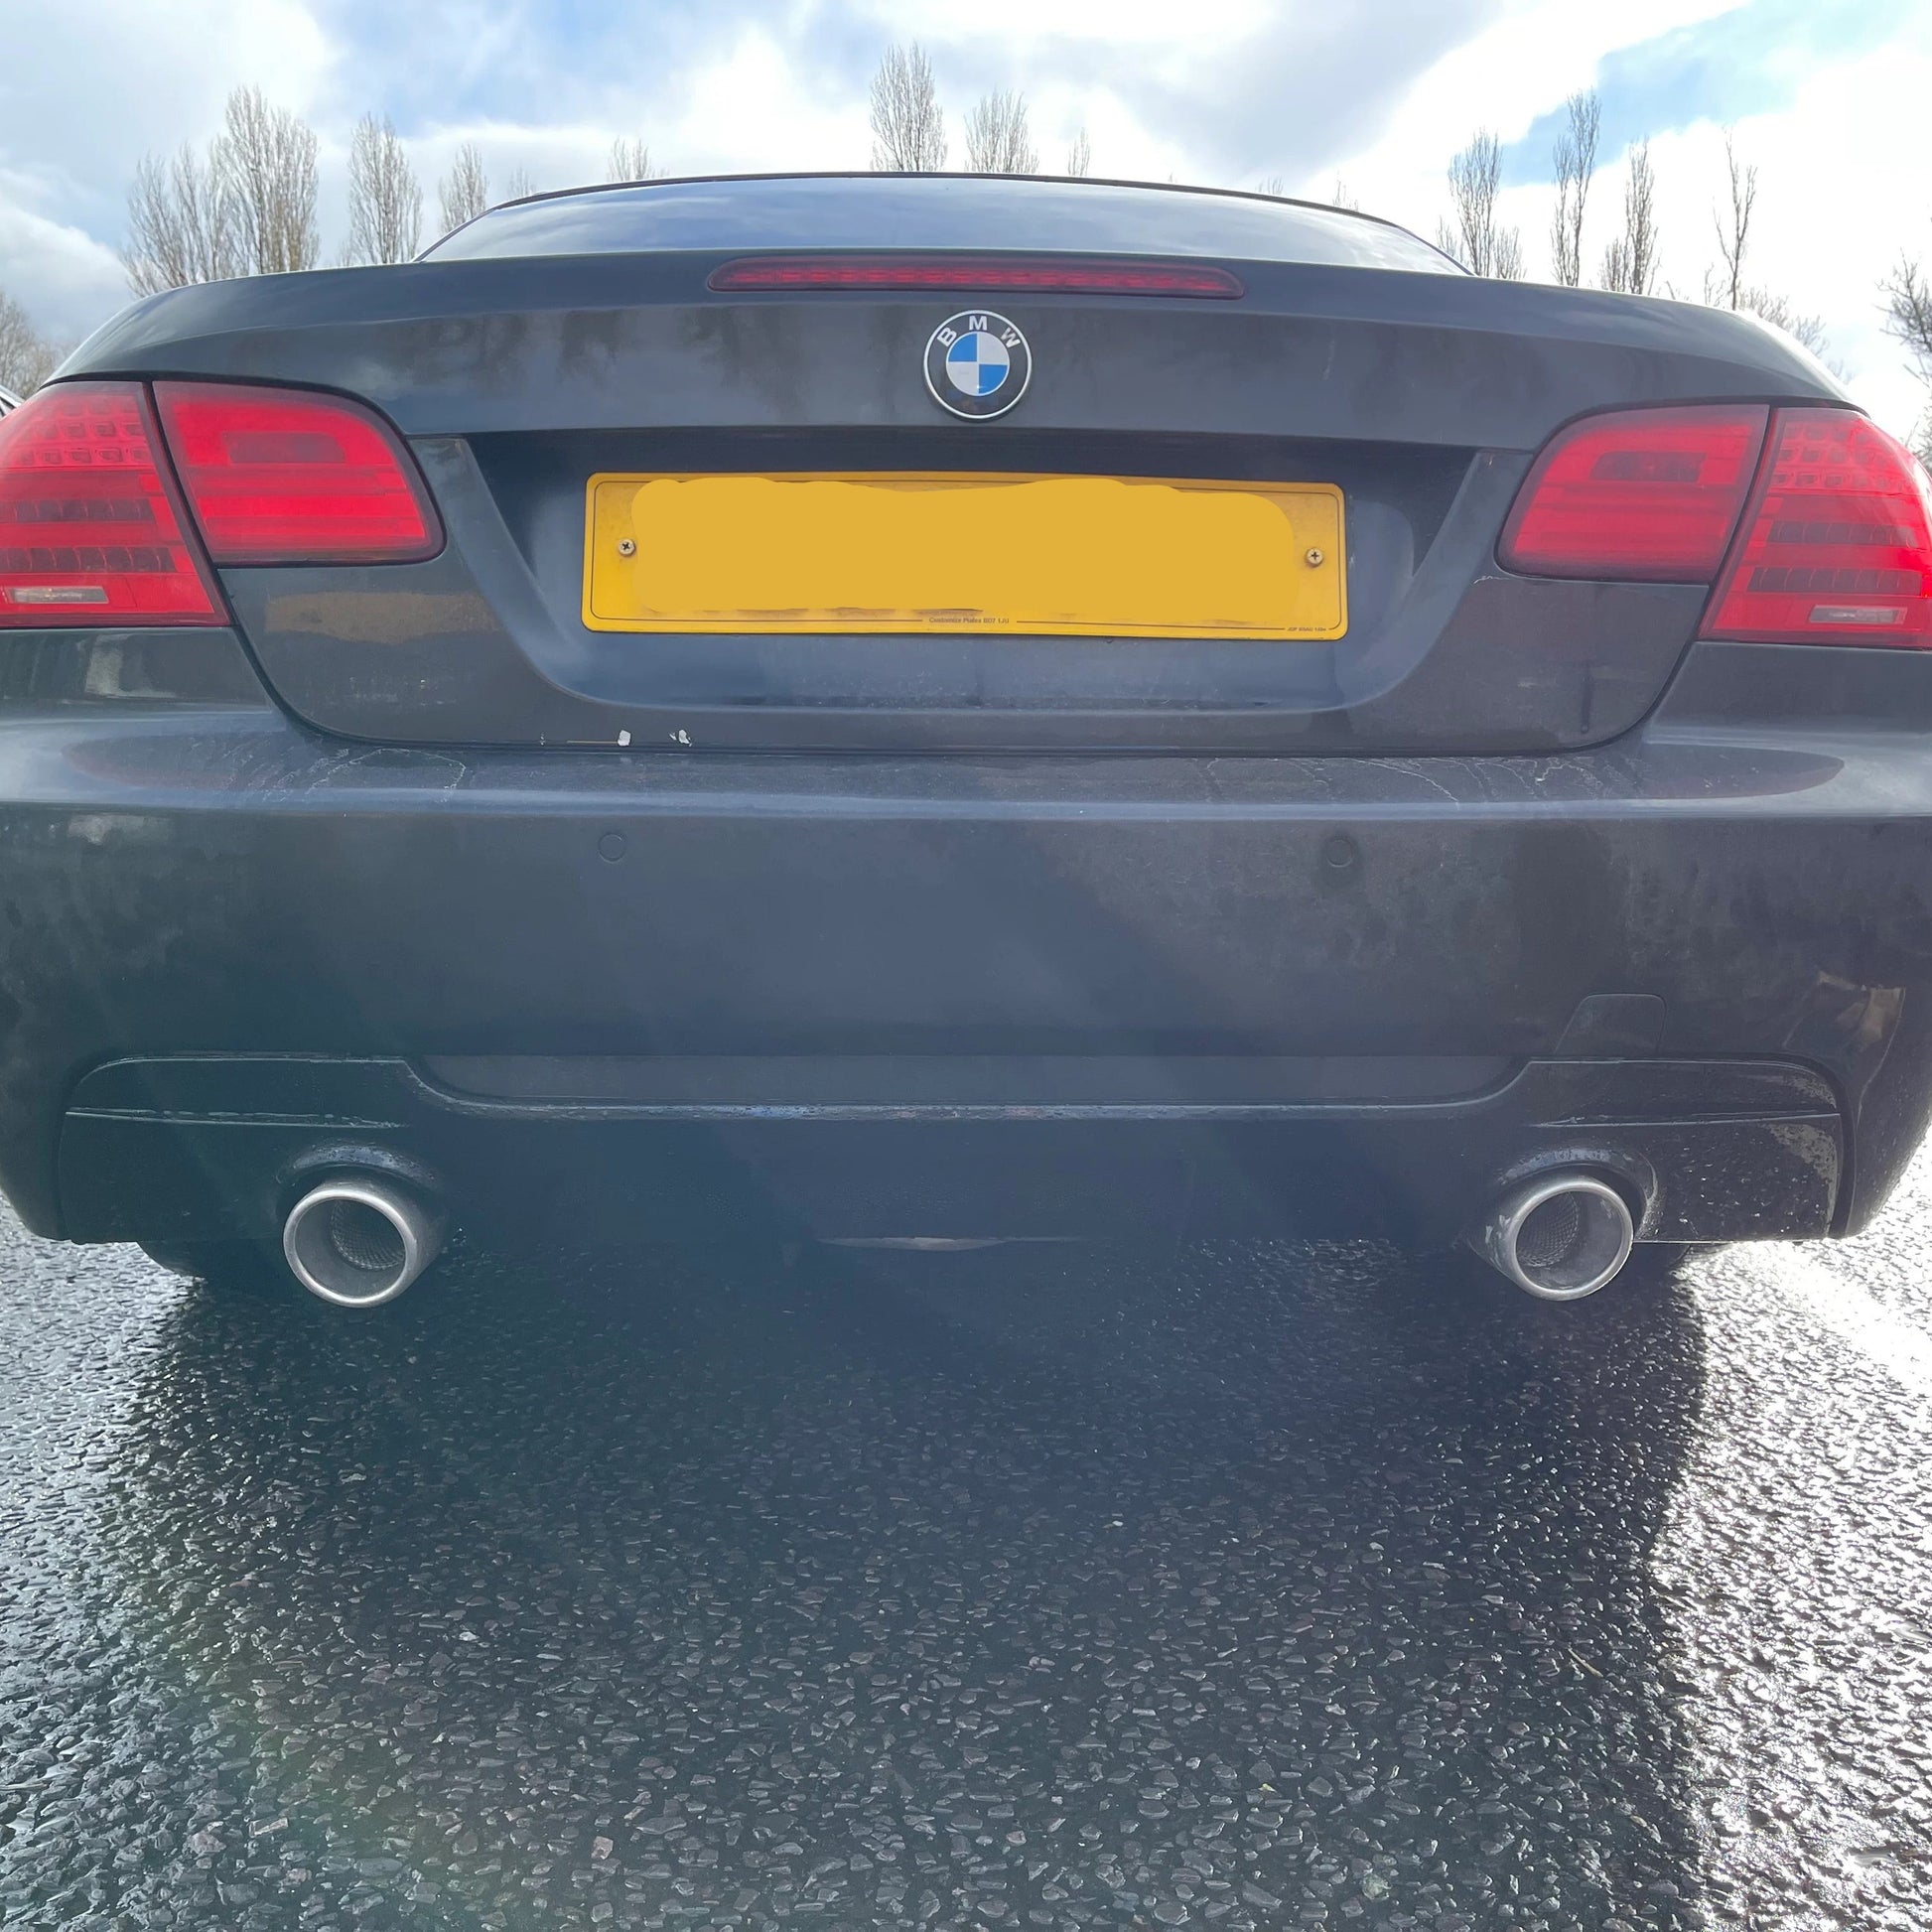 BMW E92 E93 3 Series M Performance Style Gloss Black Rear Diffuser Dual Exhaust 05-13-Carbon Factory